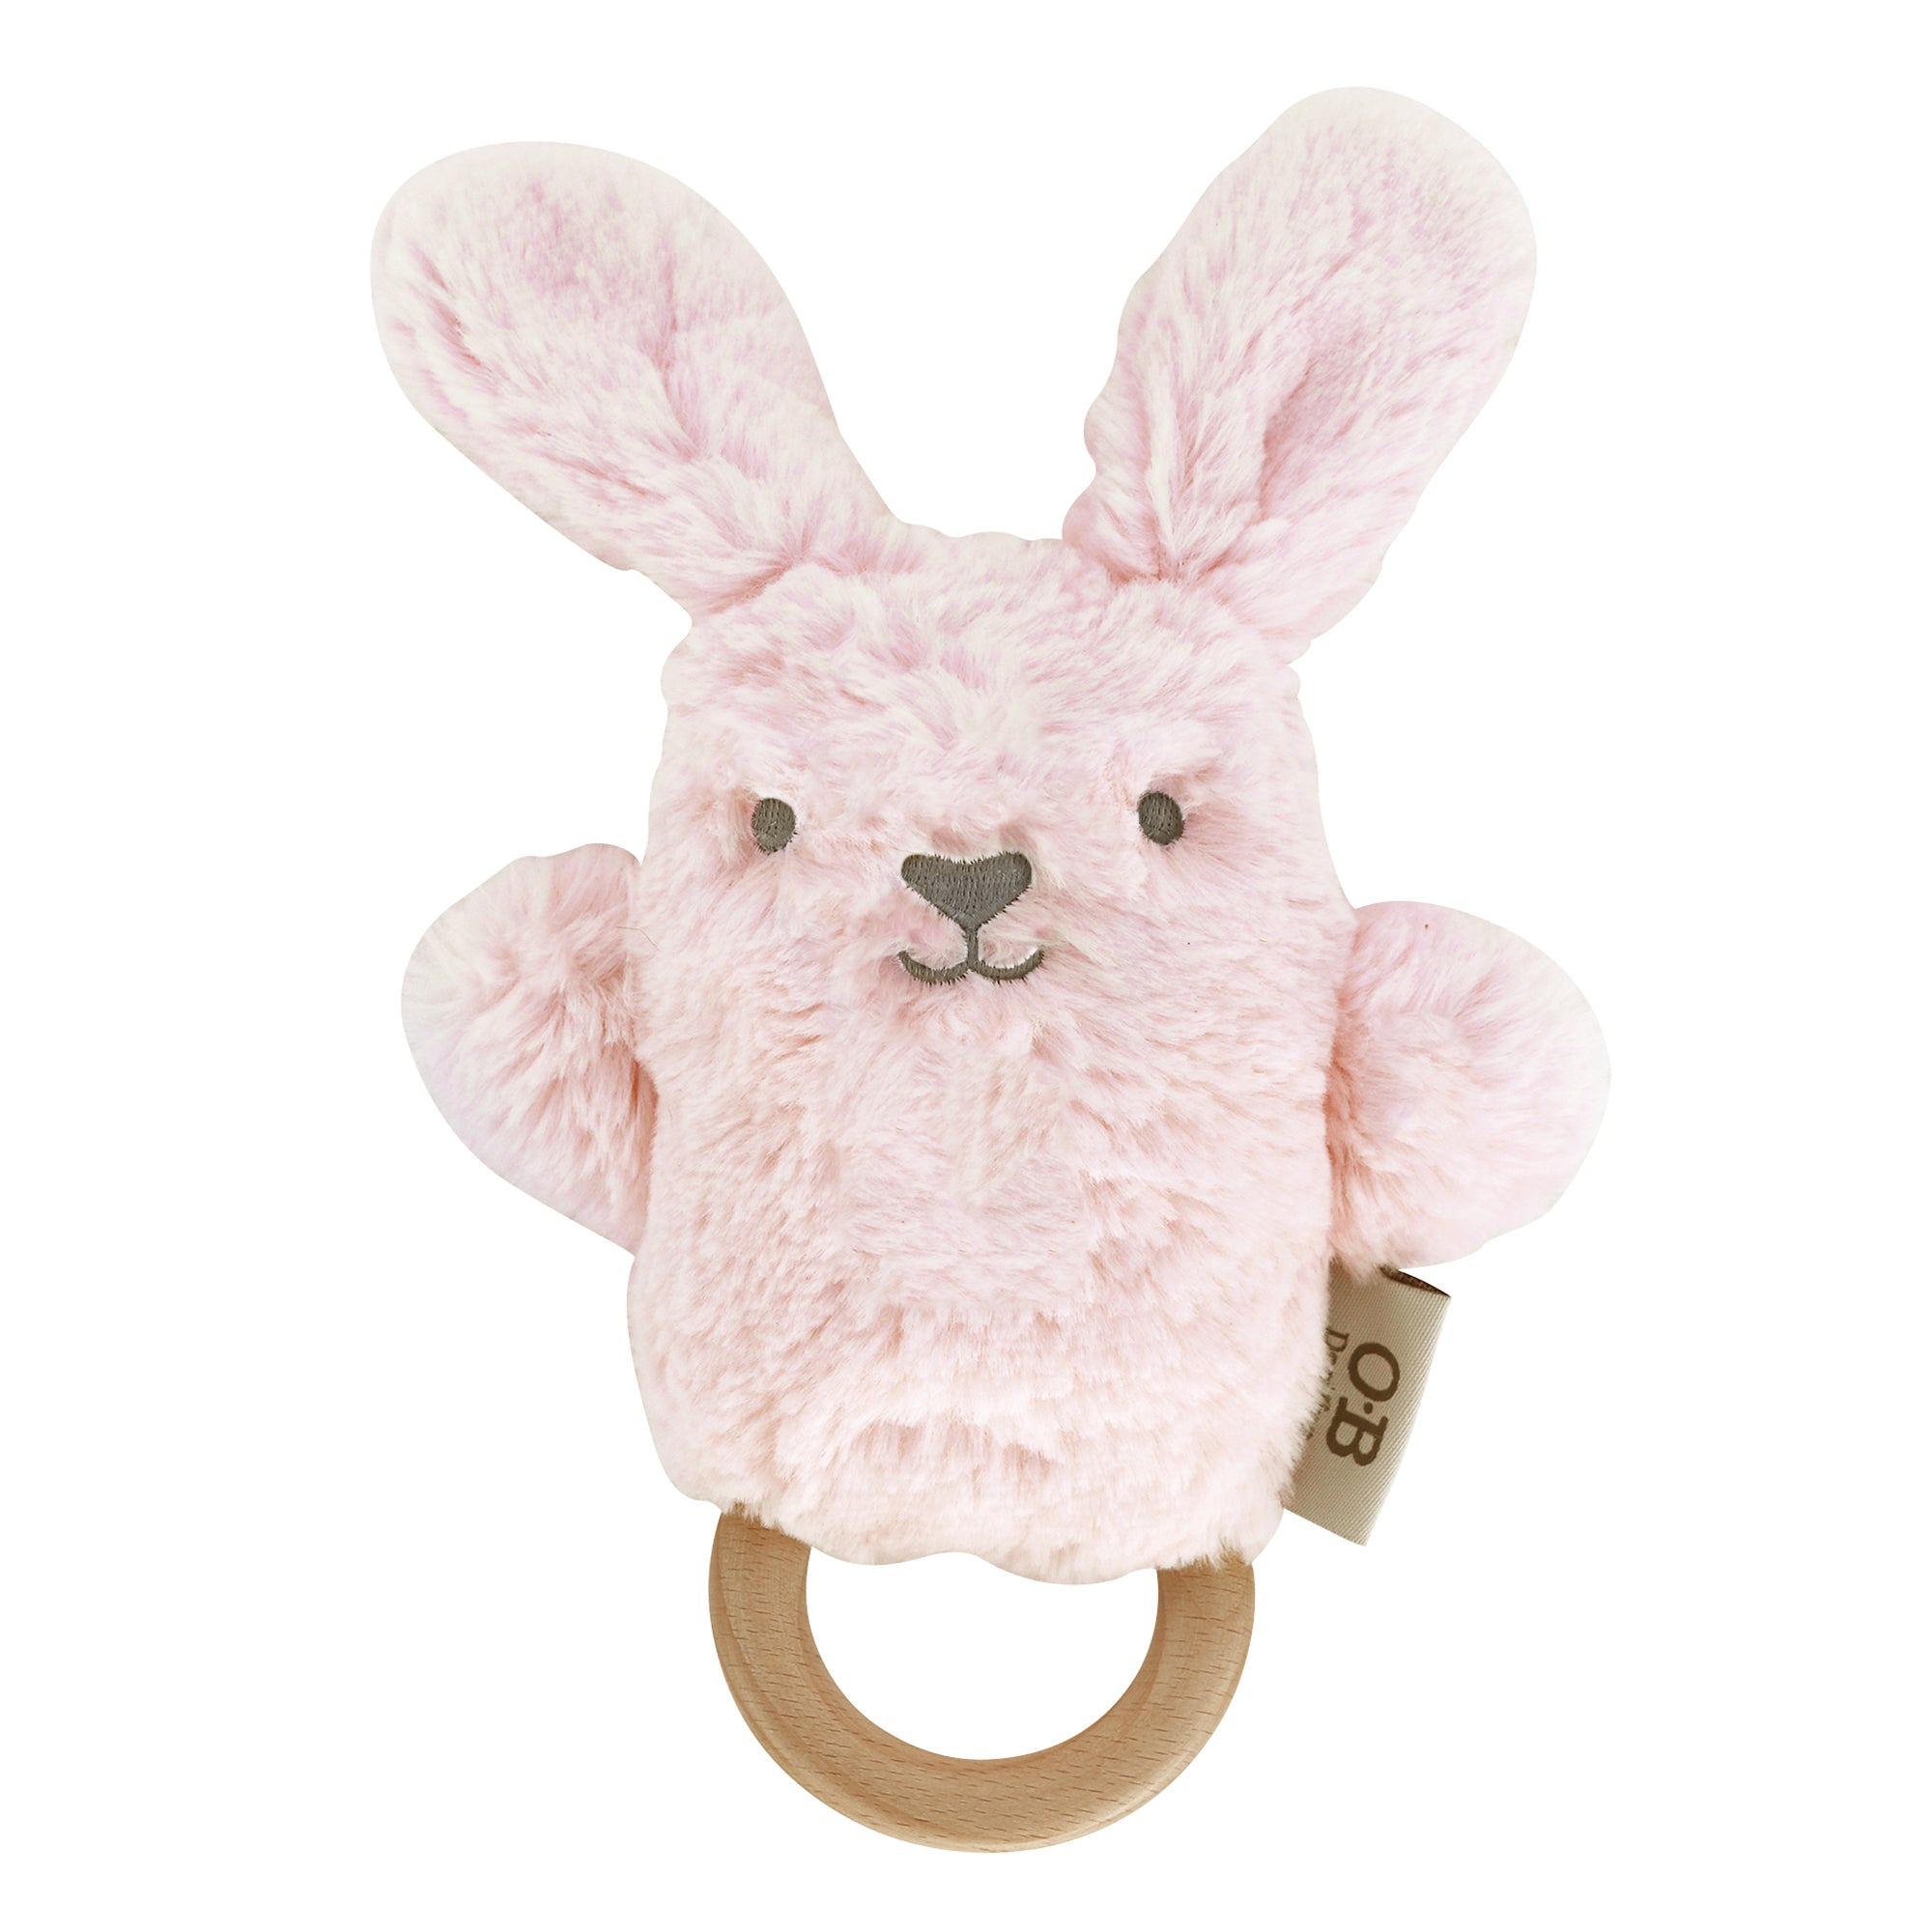 OB Designs Soft Rattle Toy - Betsy Bunny